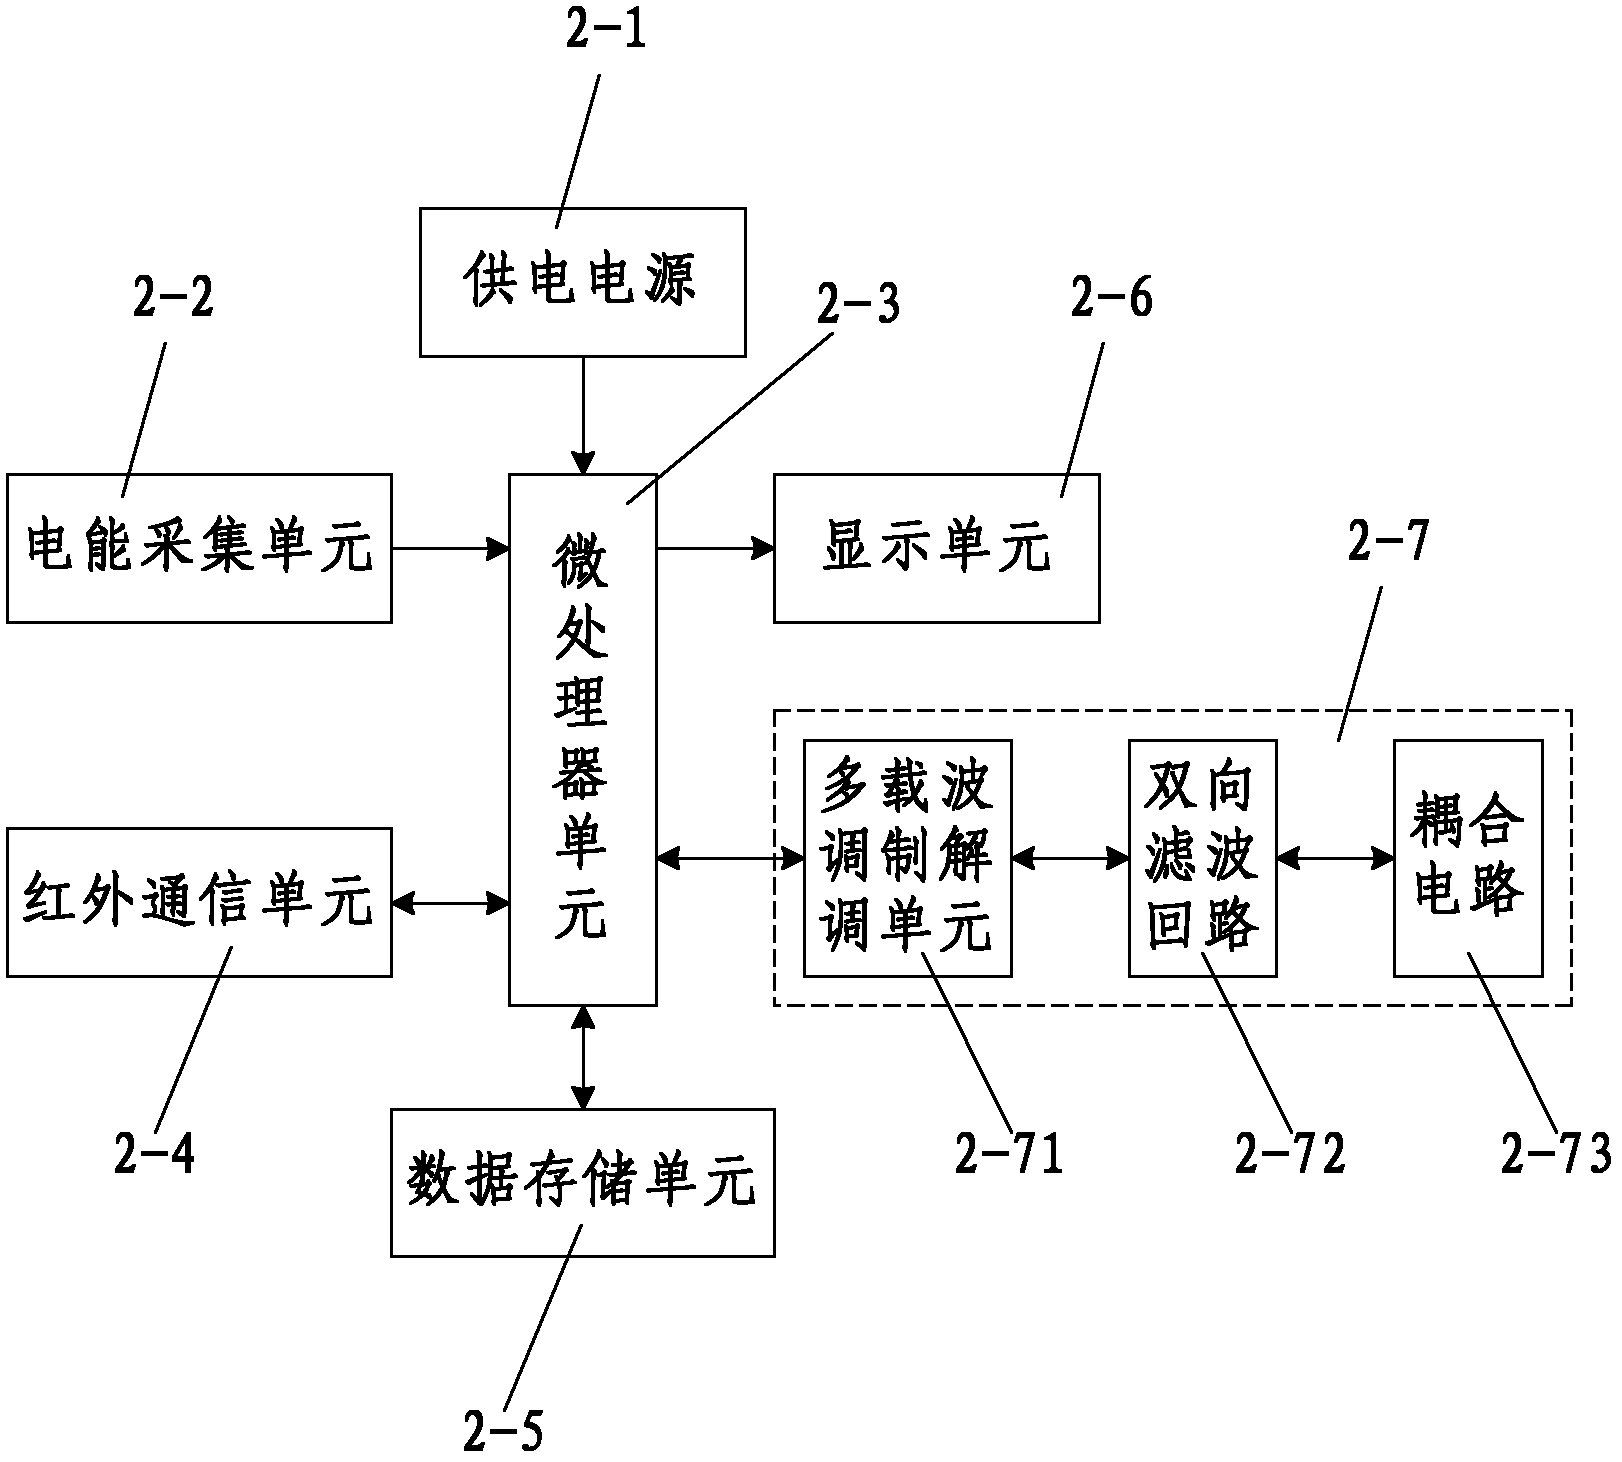 Electricity data acquisition and analysis system for high-energy-consumption electricity enterprise